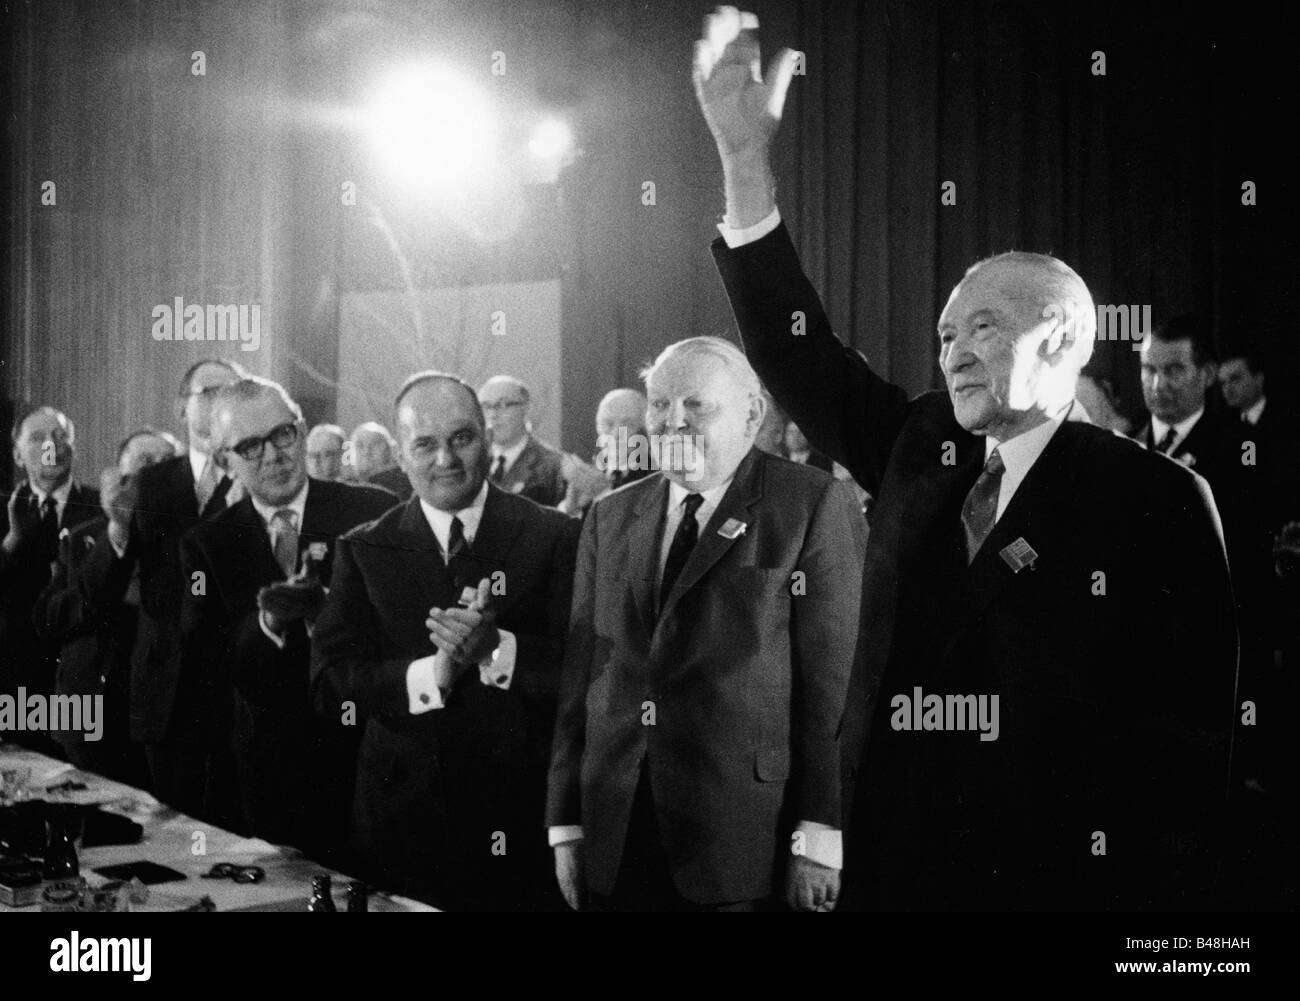 Adenauer, Konrad, 5.1.1876 - 19.4.1967, German politician (CDU) and statesman, Chancellor of Germany 1949 - 1963, half length, with Federal minister of Economy Ludwig Erhard, Rainer Barzel, 14th Federal Conference of the CDU party, Bonn, 21.3.1966 - 23.3.1966, Stock Photo